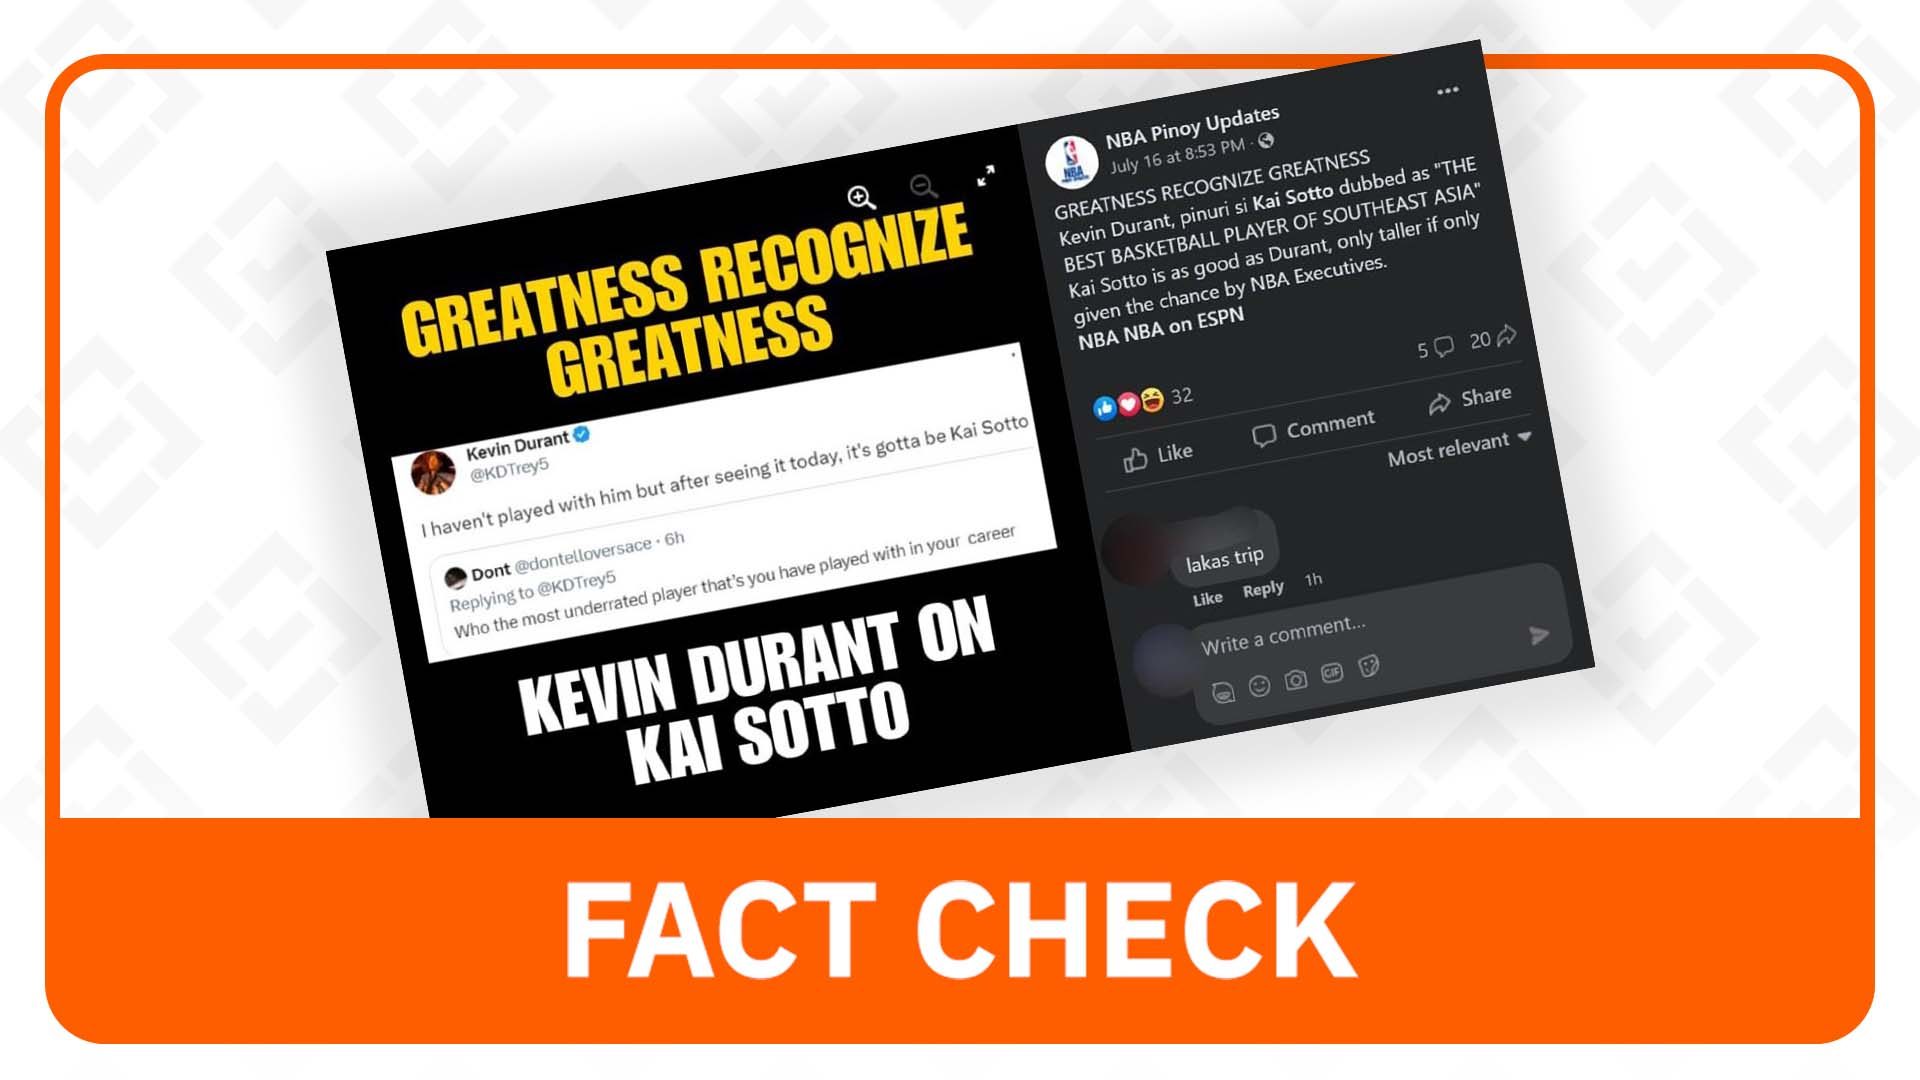 FACT CHECK: Supposed Kevin Durant tweet commending Kai Sotto is fake